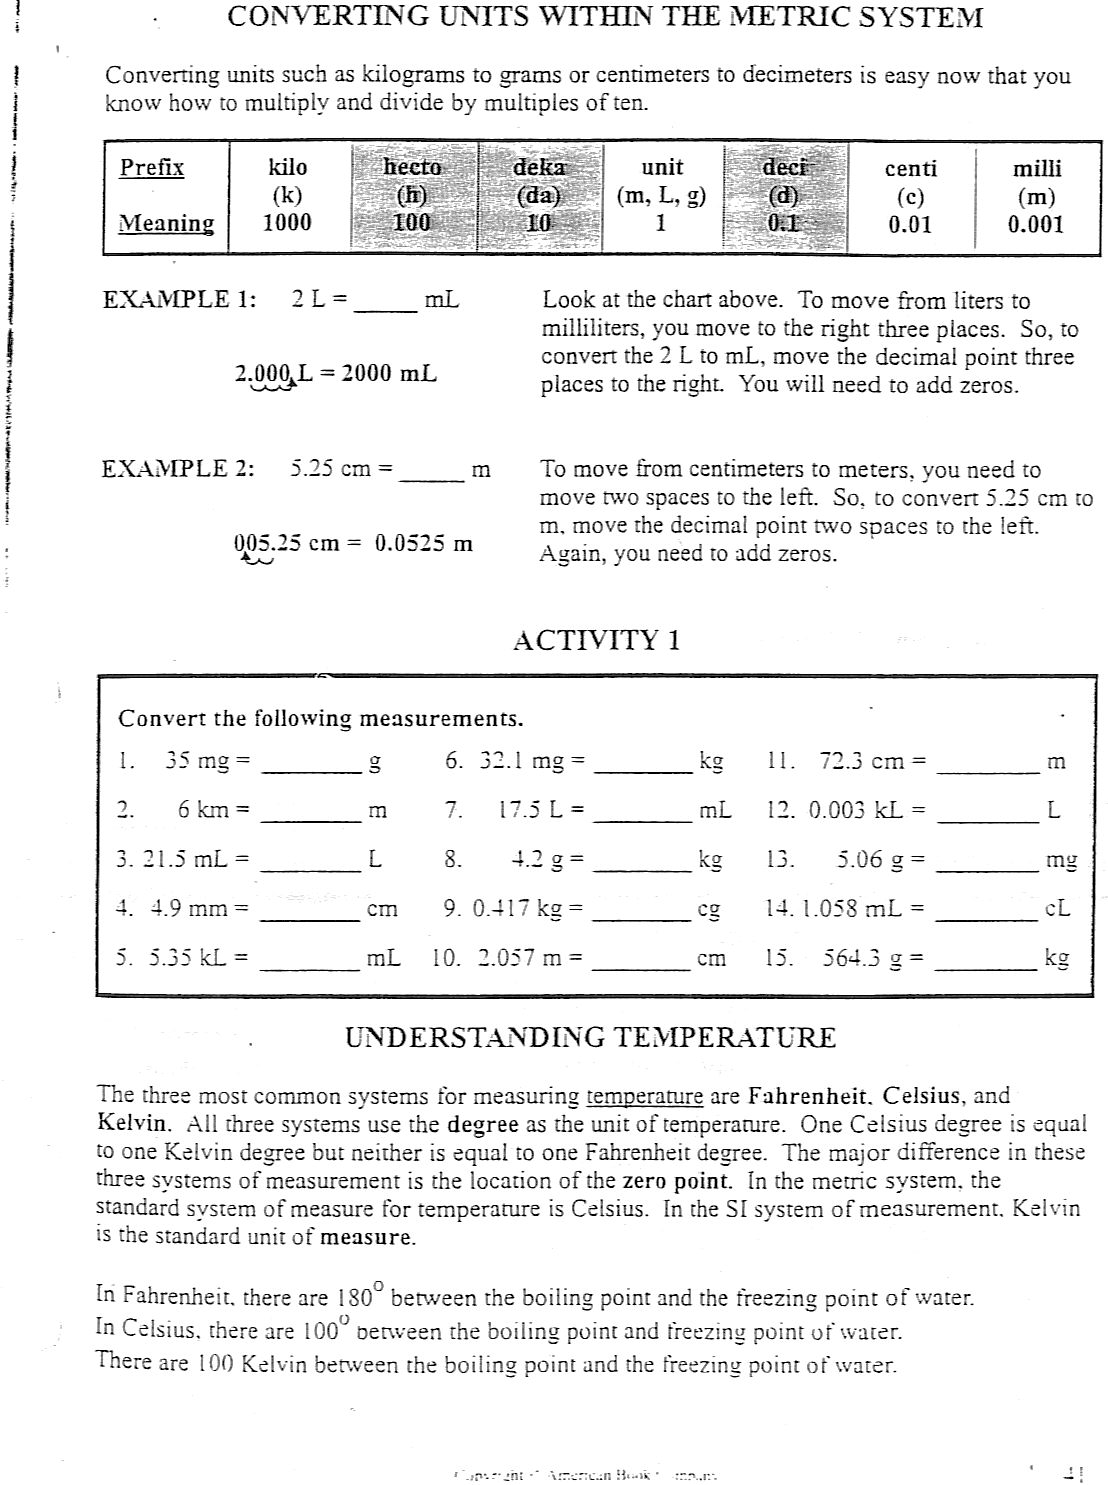 17-best-images-of-high-school-physical-science-worksheets-metric-conversion-worksheets-high